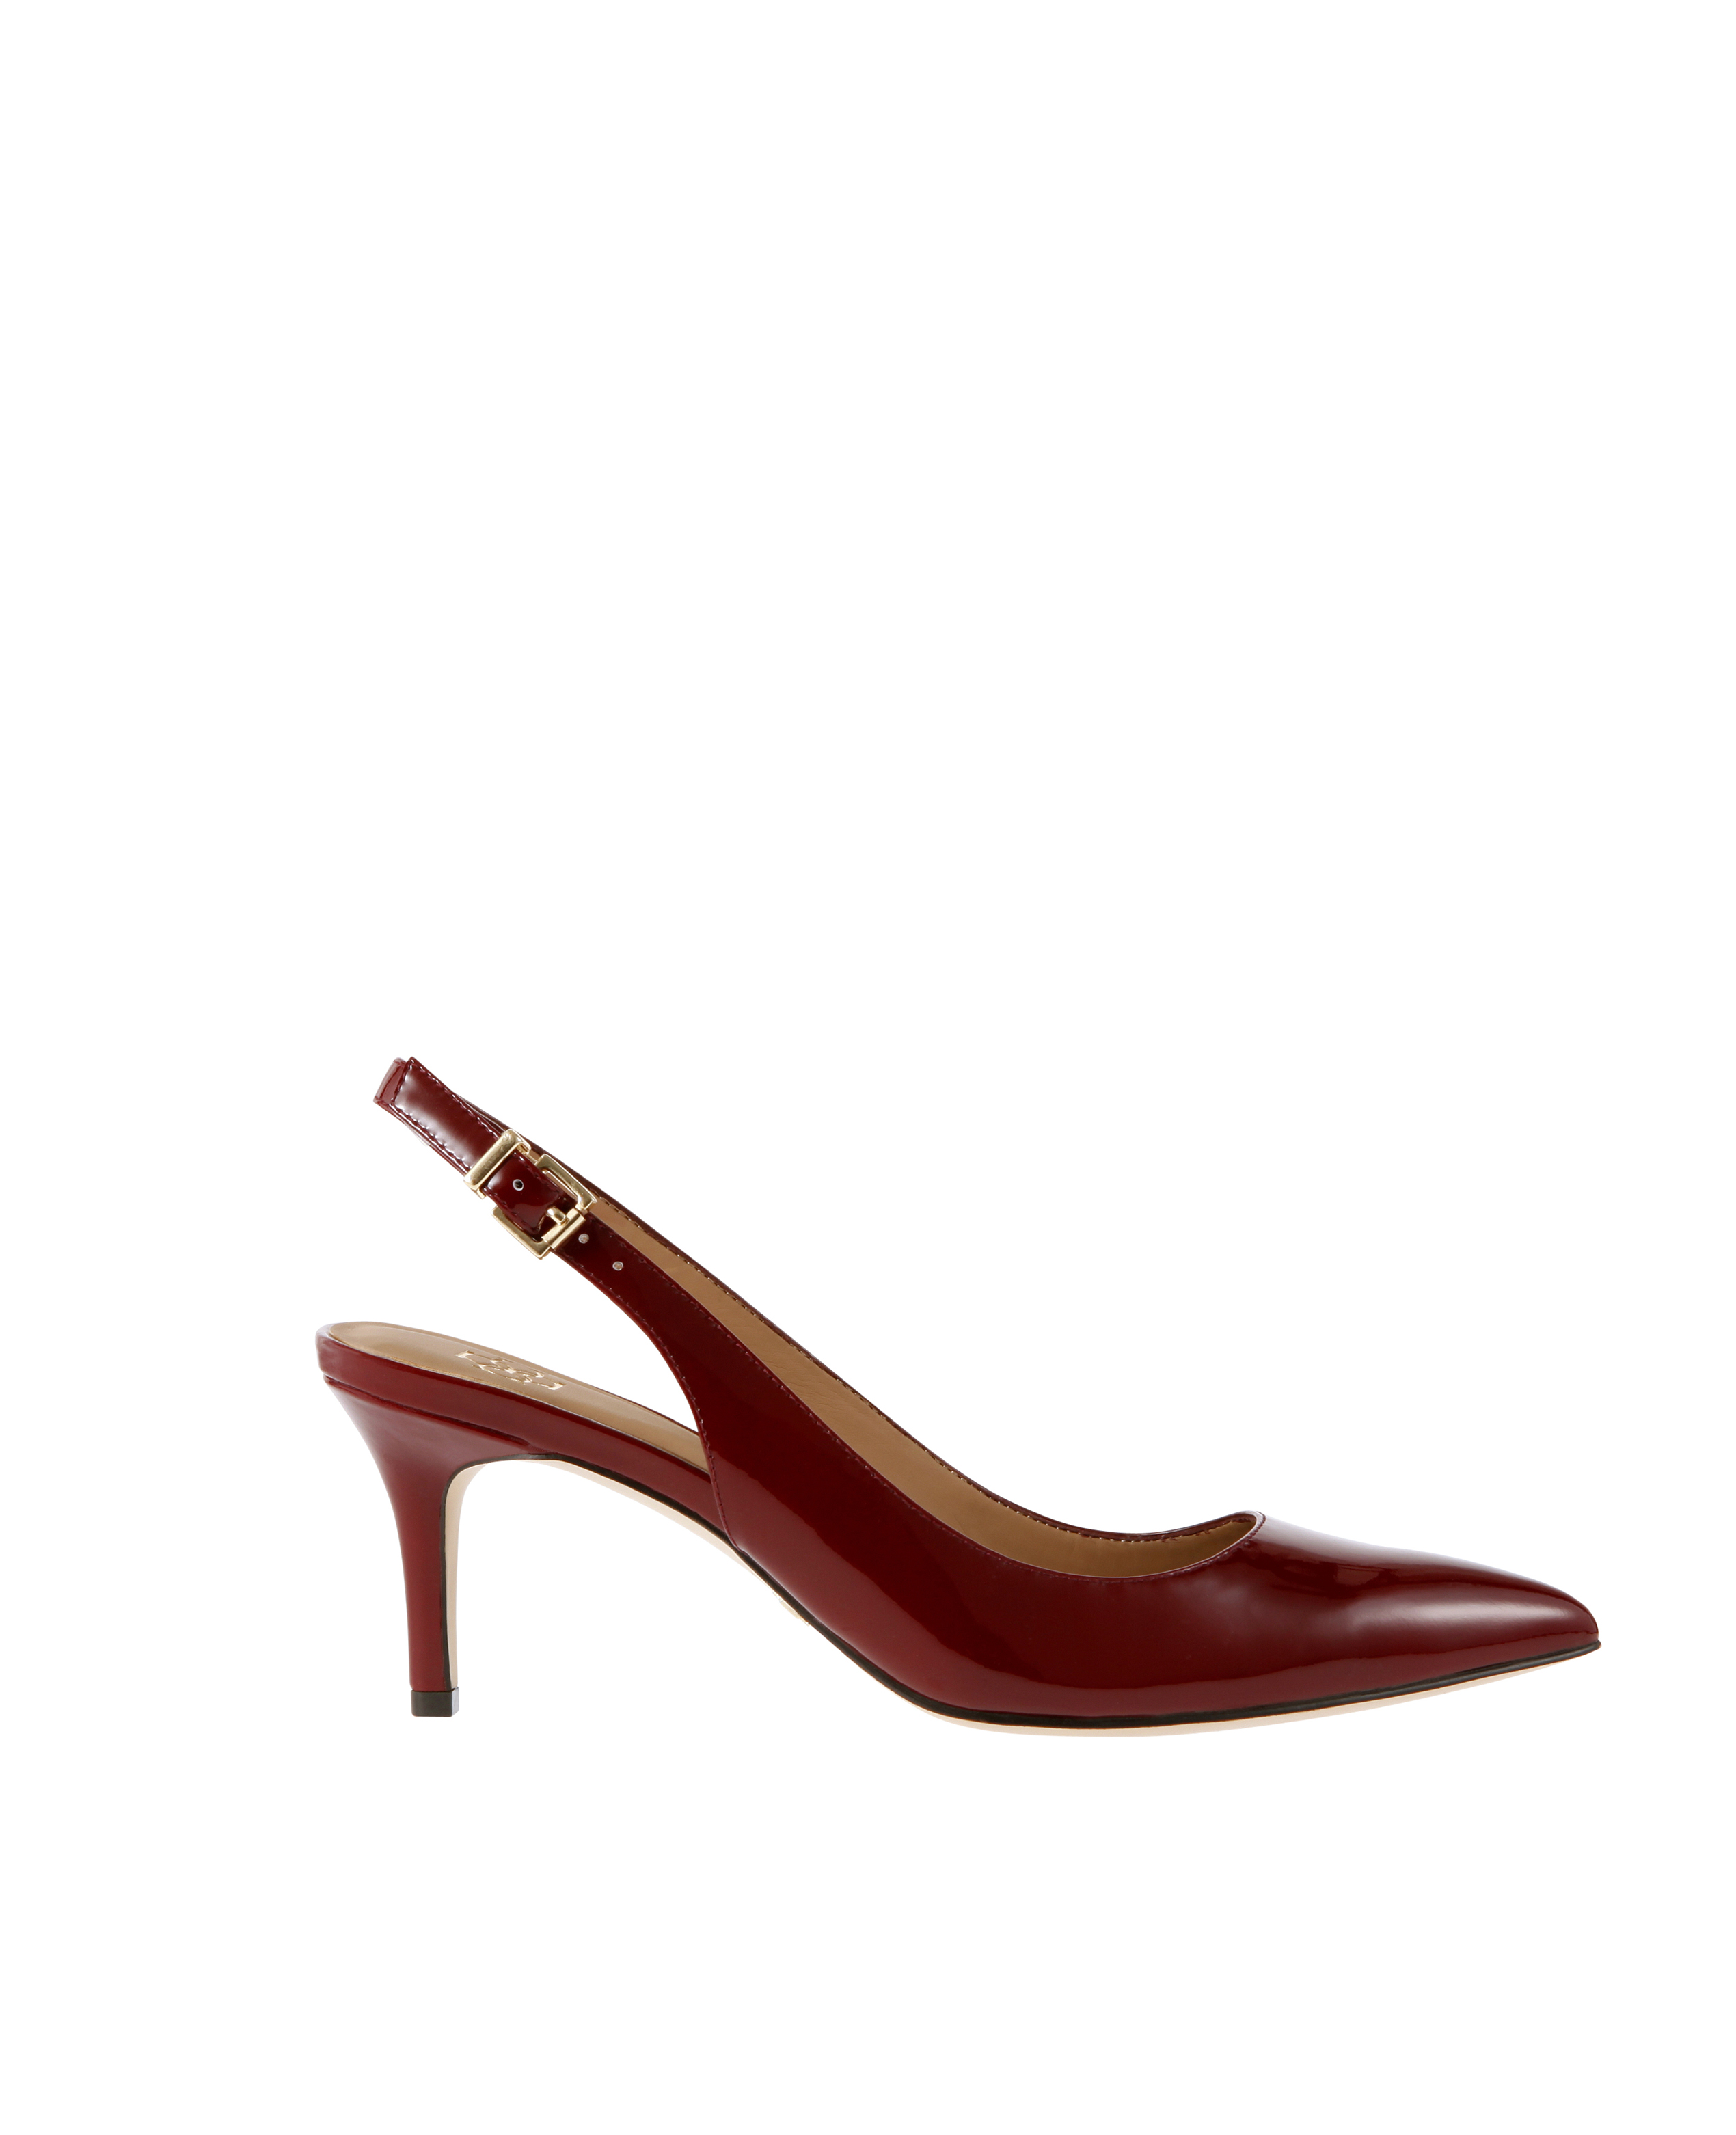 Ann taylor Perfect Patent Leather Slingback Kitten Heels in Red | Lyst